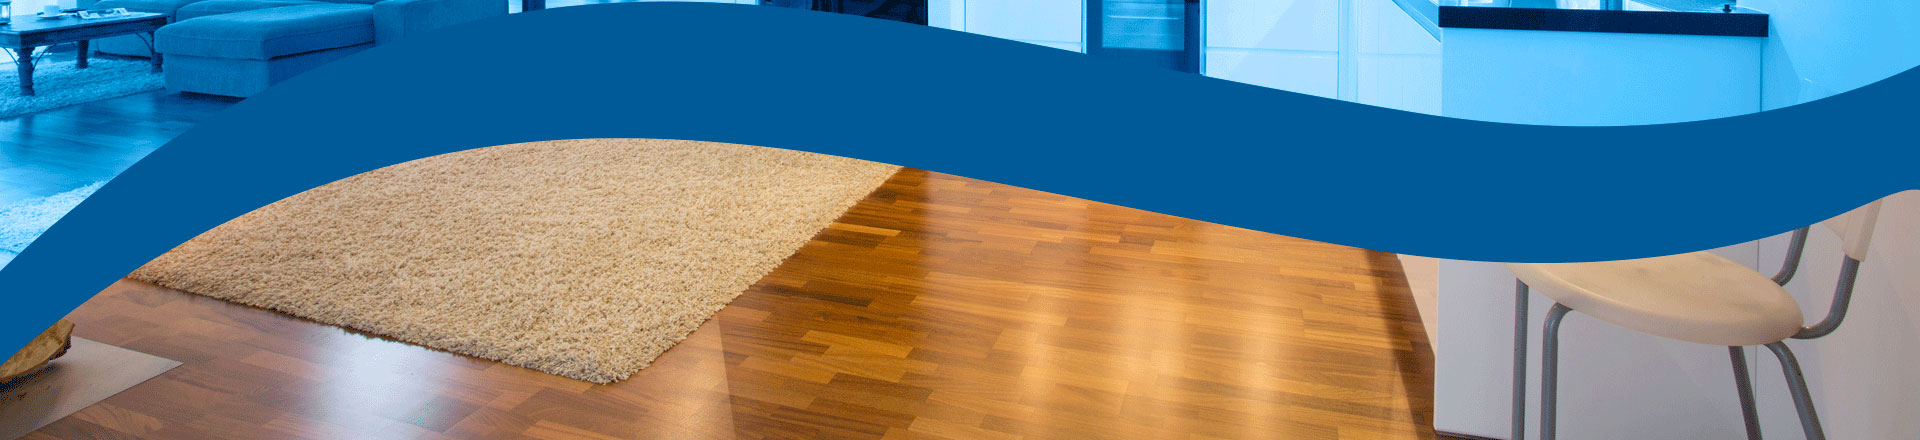 Wood Floor Cleaning And Maintenance Basic Coatings